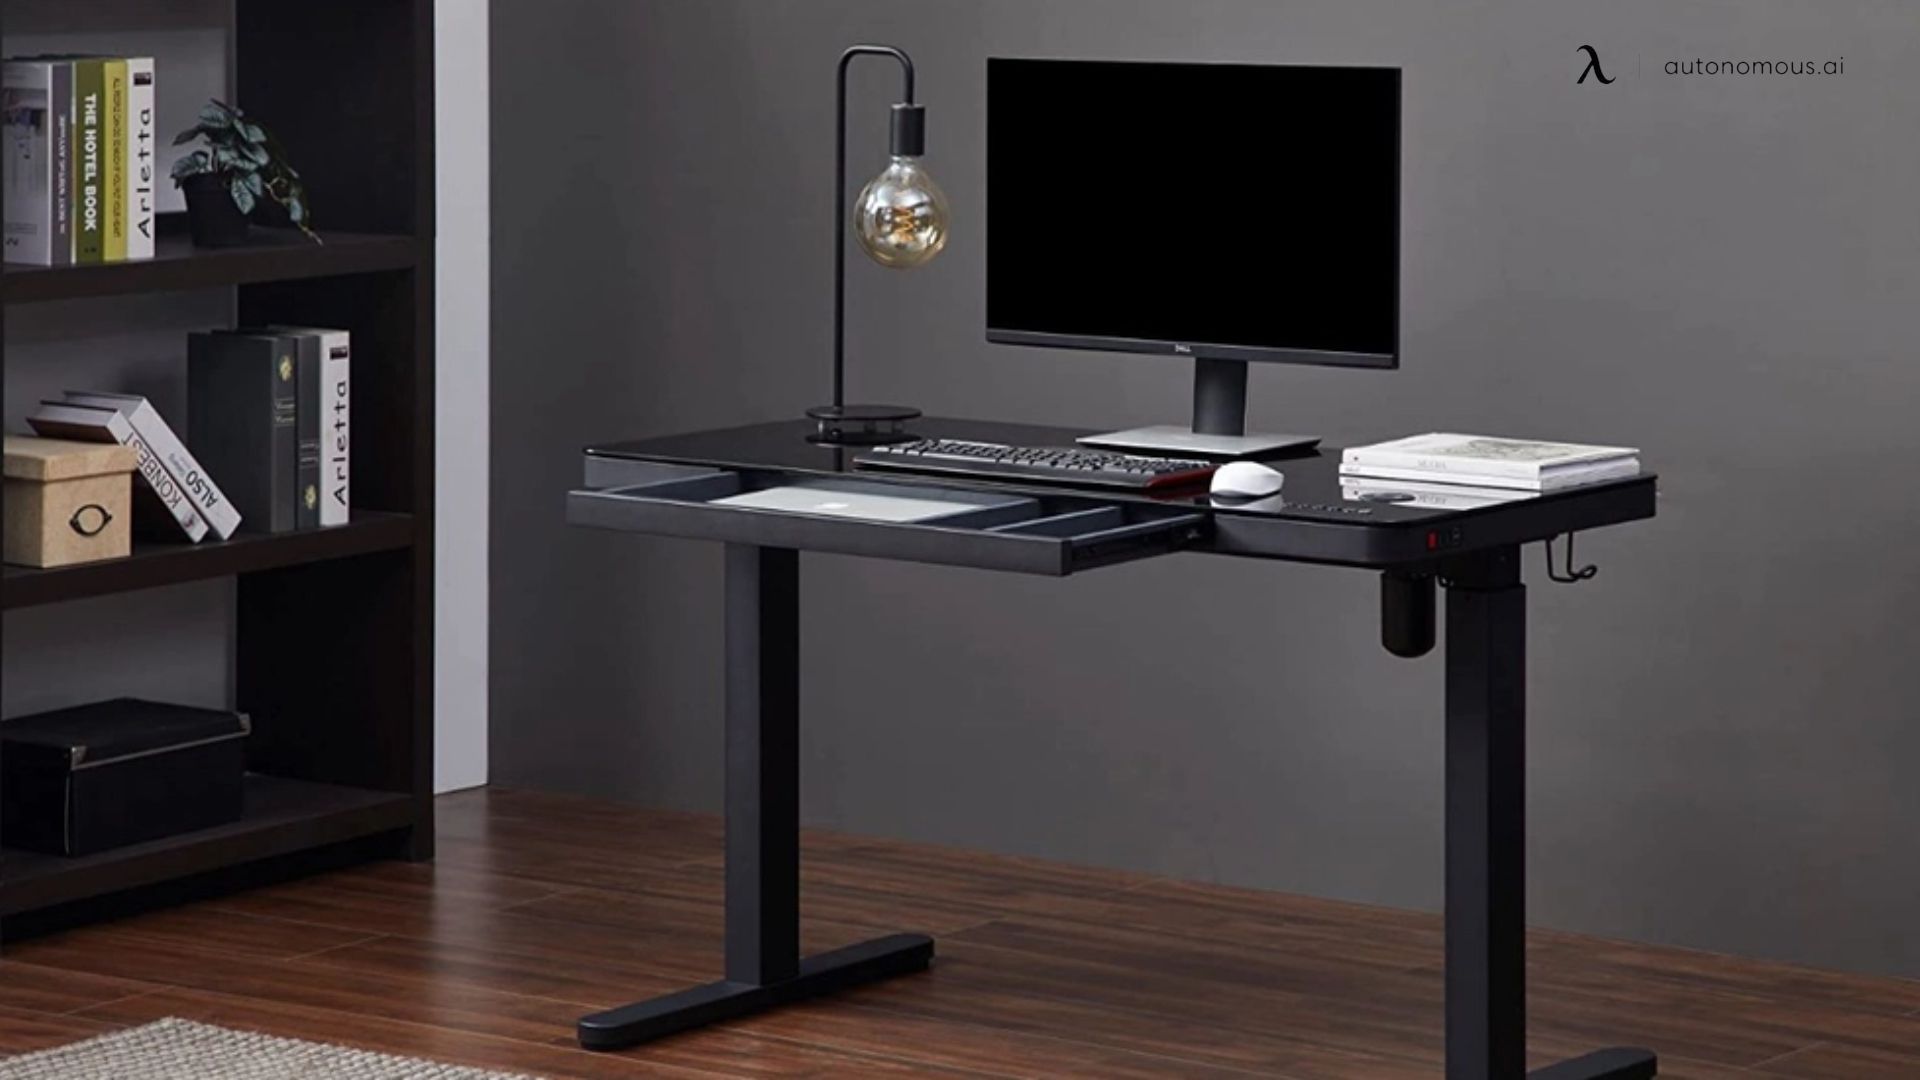 Kowo desk with wireless charger